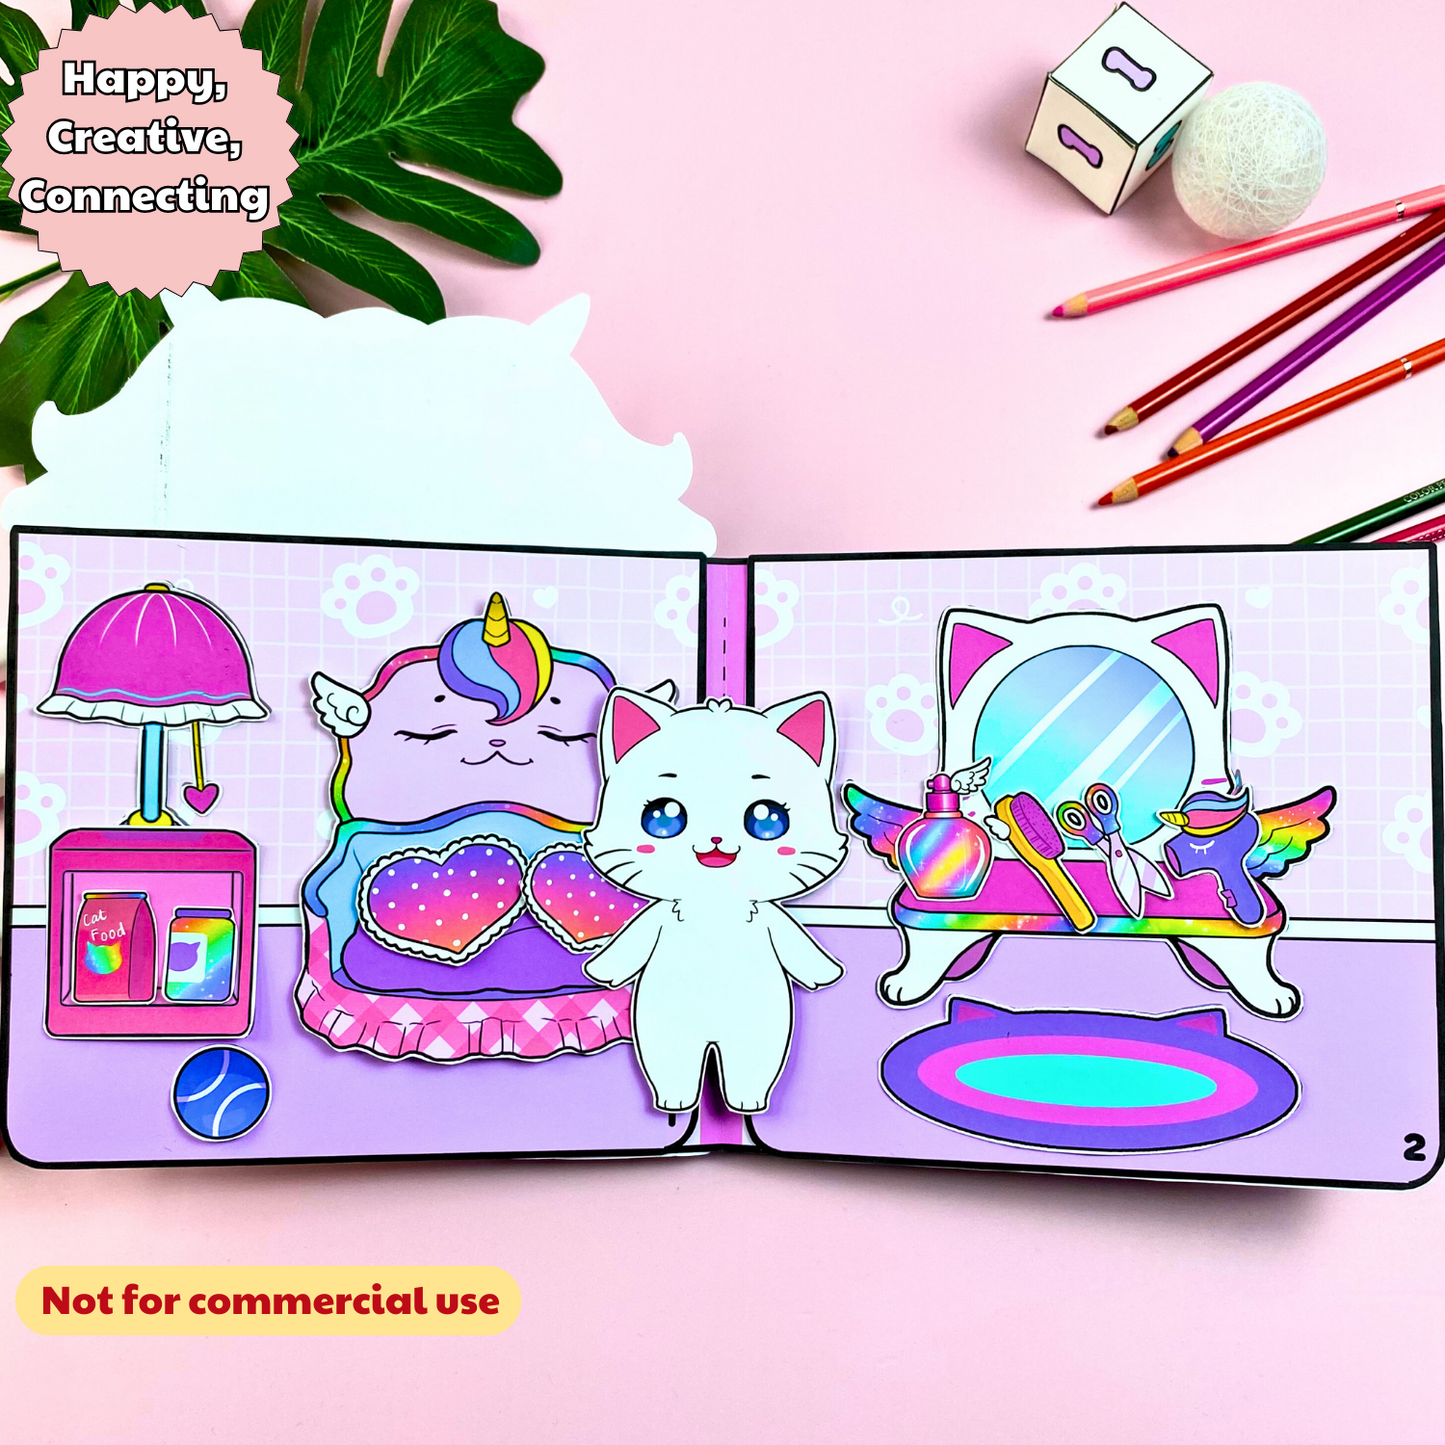 Education Activity Book | Pretty Cat Doll House, Fun Paper Toy for kid, Unique Birthday Gifts, Family connection, Limit screen time, Boost creativity